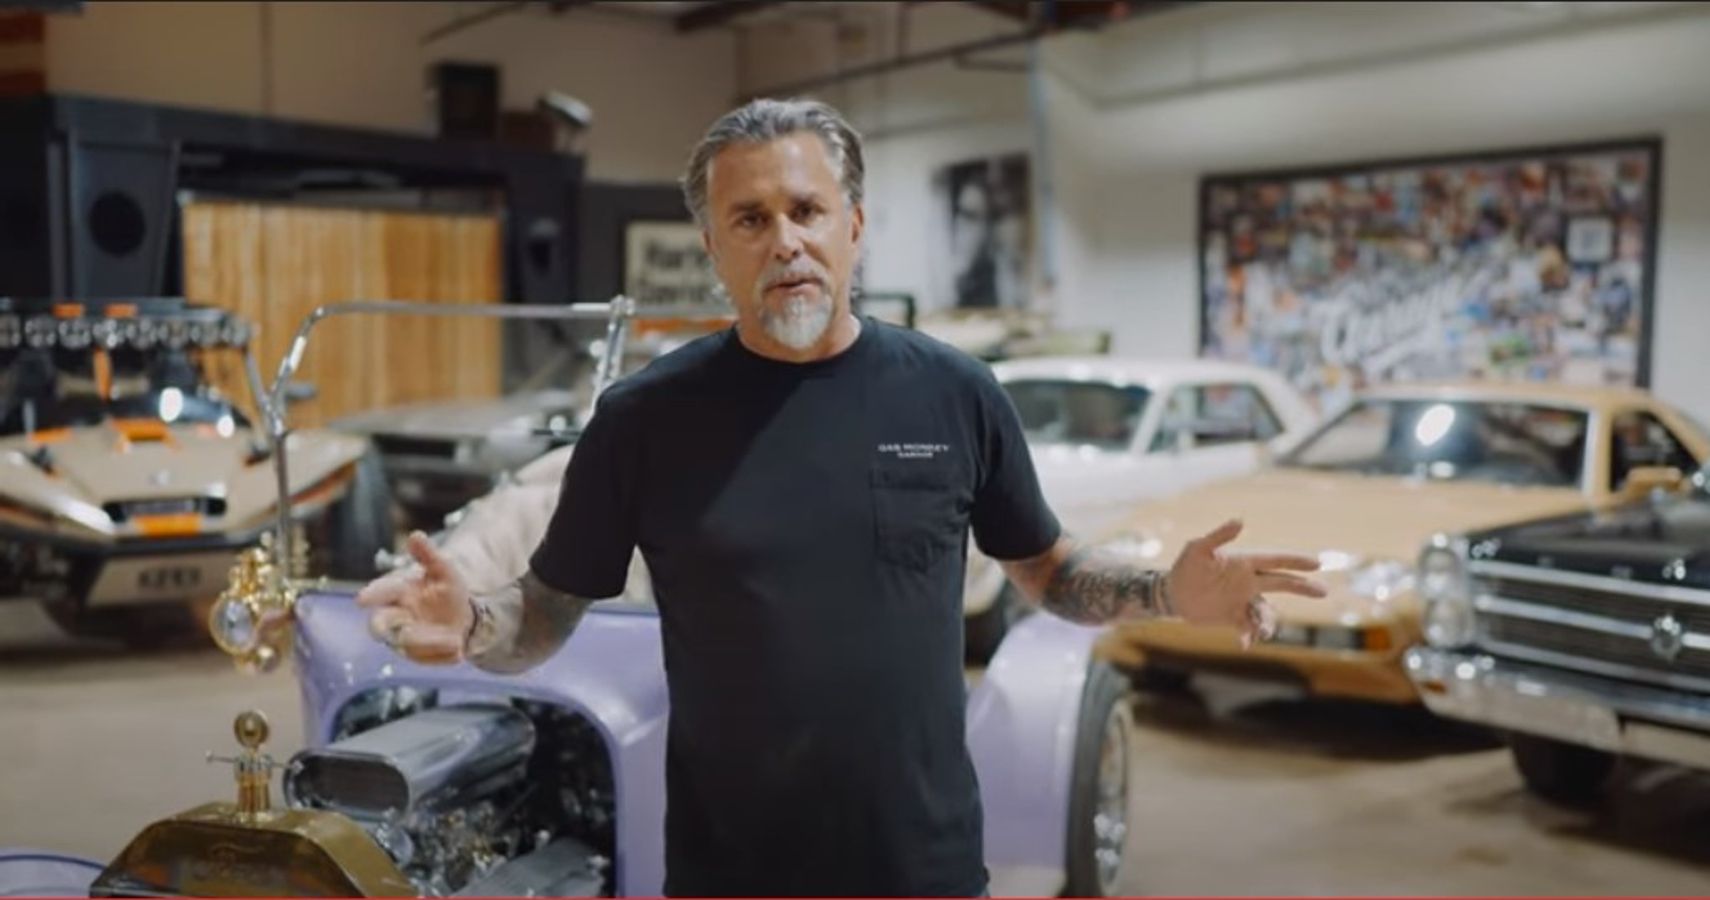 Gas Monkey Garage & Richard Rawlings YouTube Channel Richard talking  With King T in background 